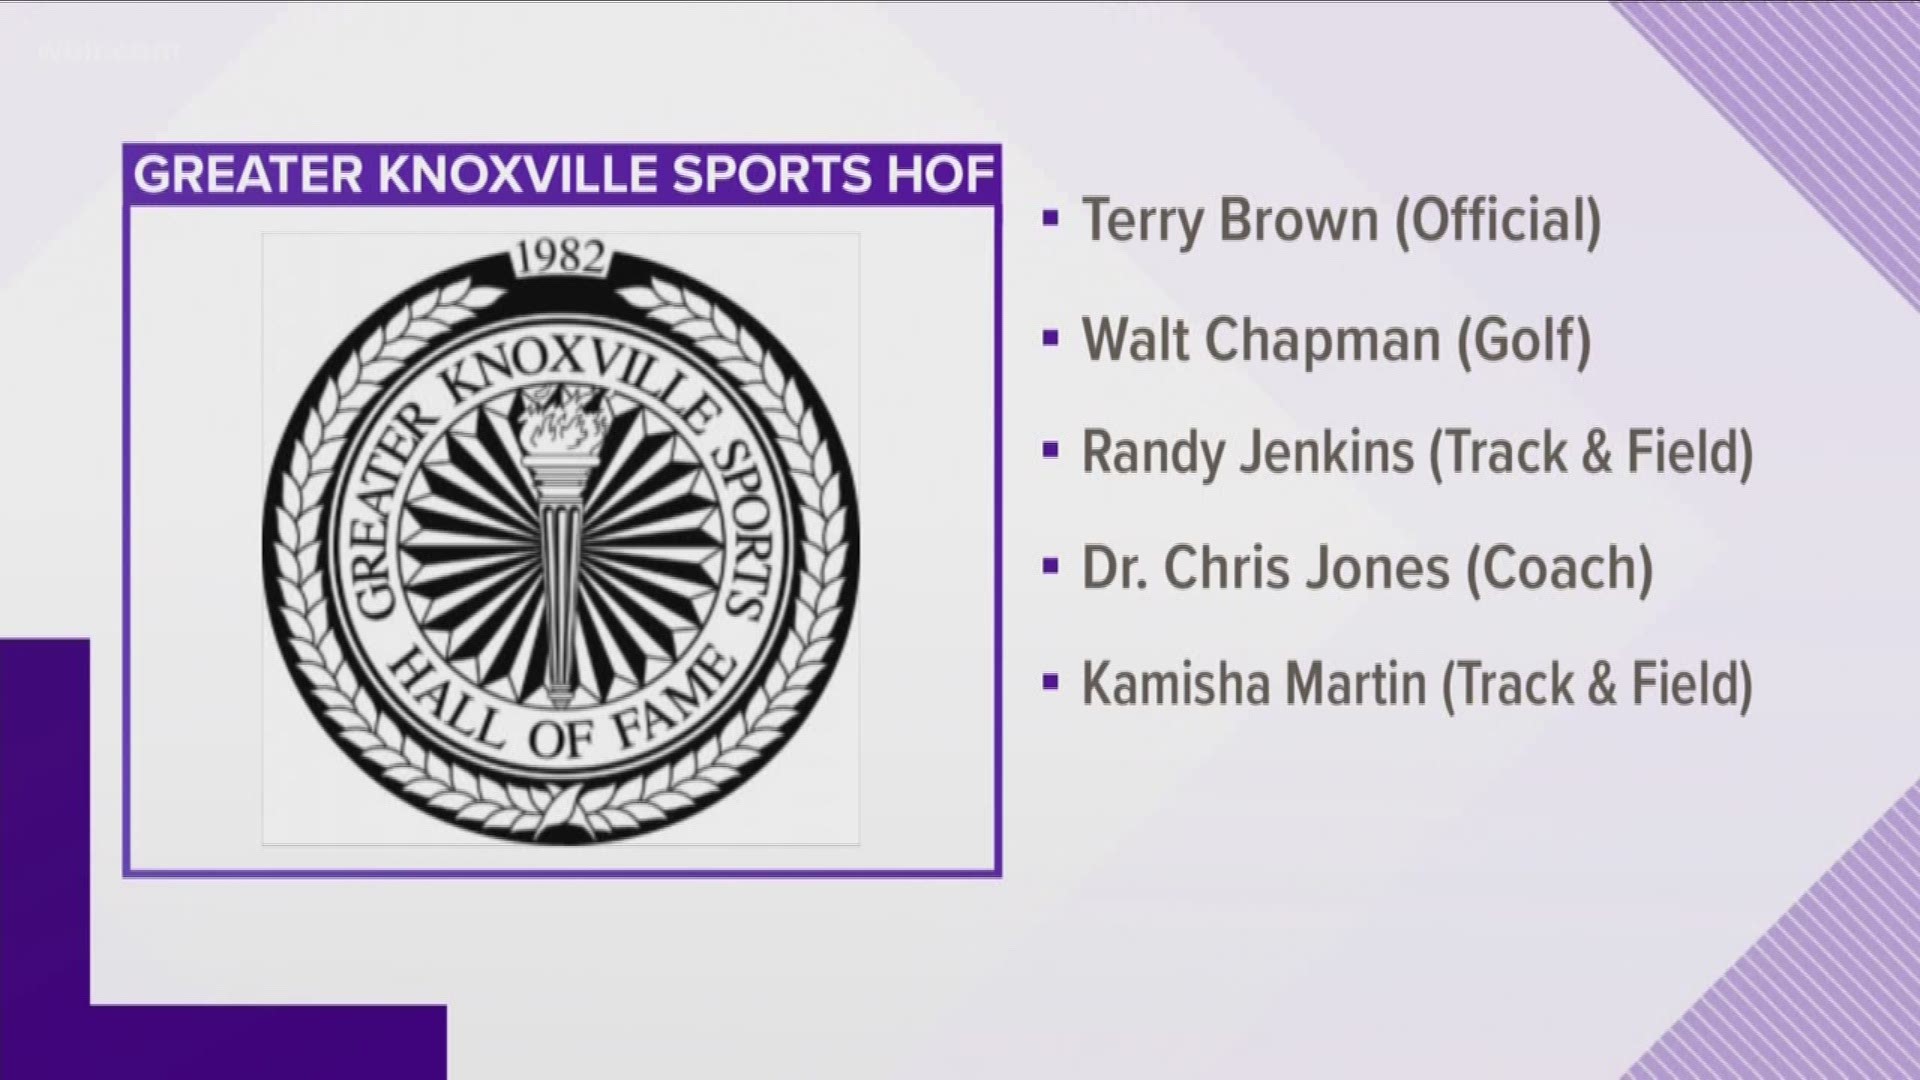 The Greater Knoxville Sports Hall of Fame announced will hold its 38th dinner and induction ceremony on July 25.